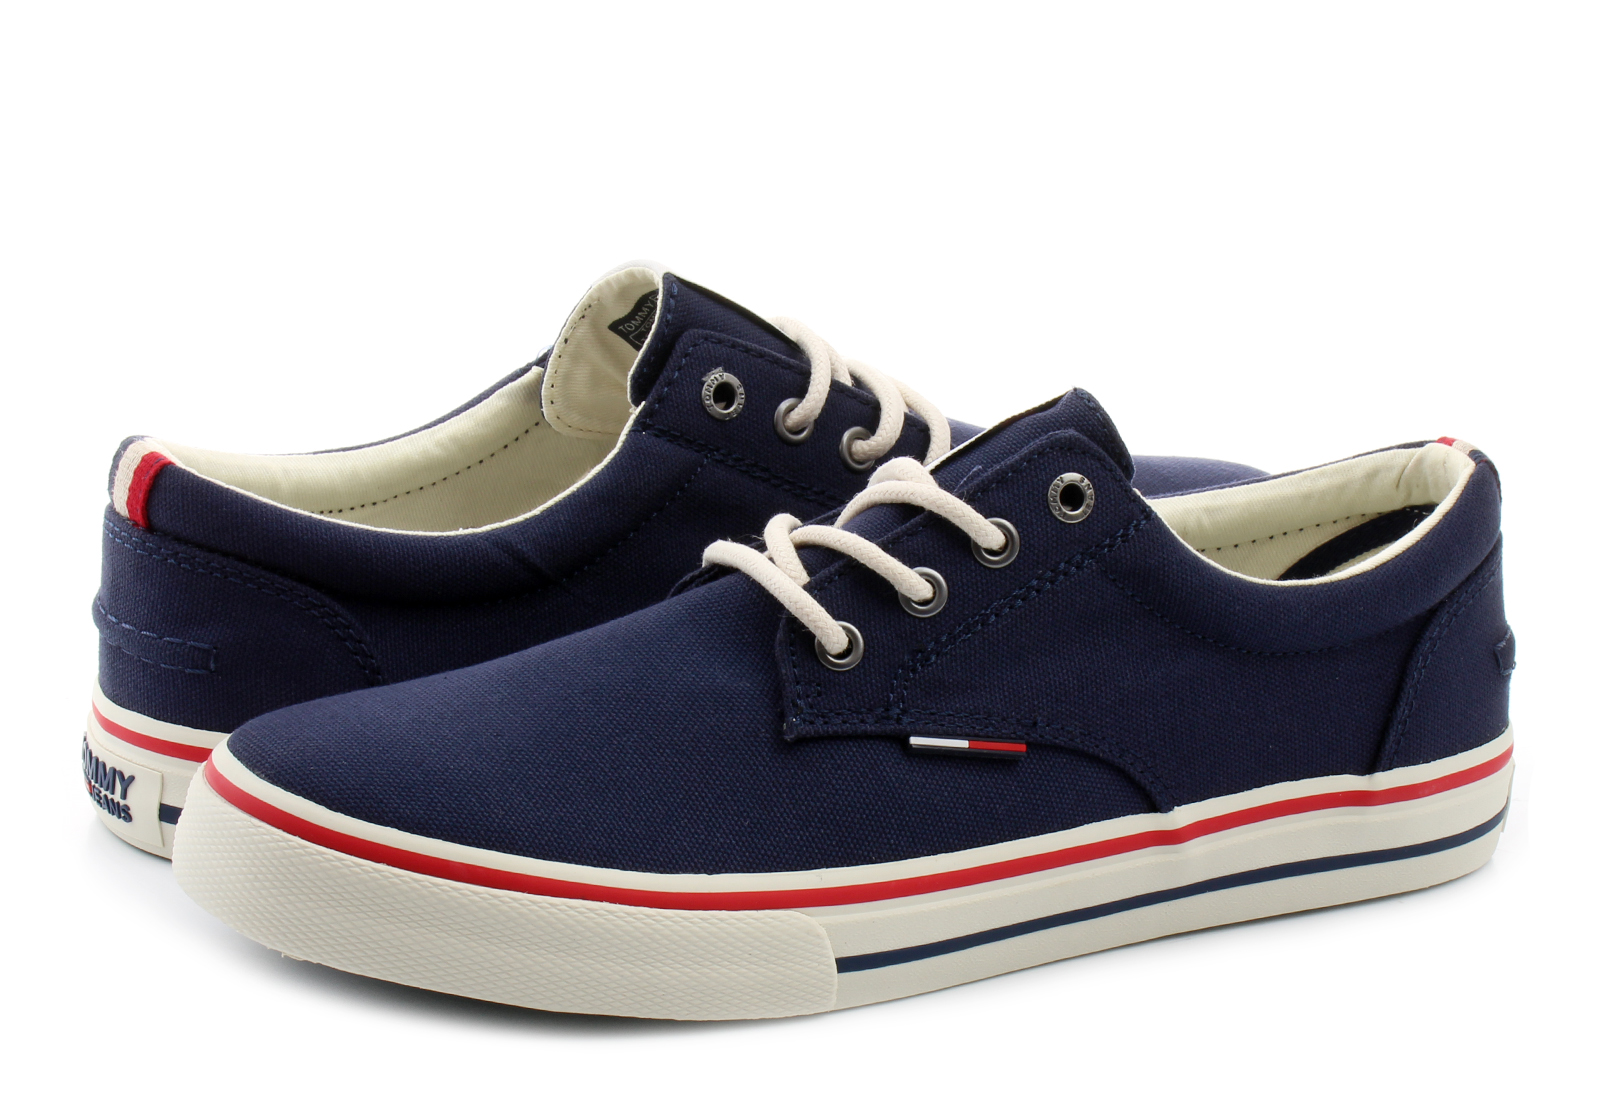 Fearless Specialty Fiddle Tommy Hilfiger Sneakers - Vic 1d2 - 18S-0001-006 - Office Shoes Romania